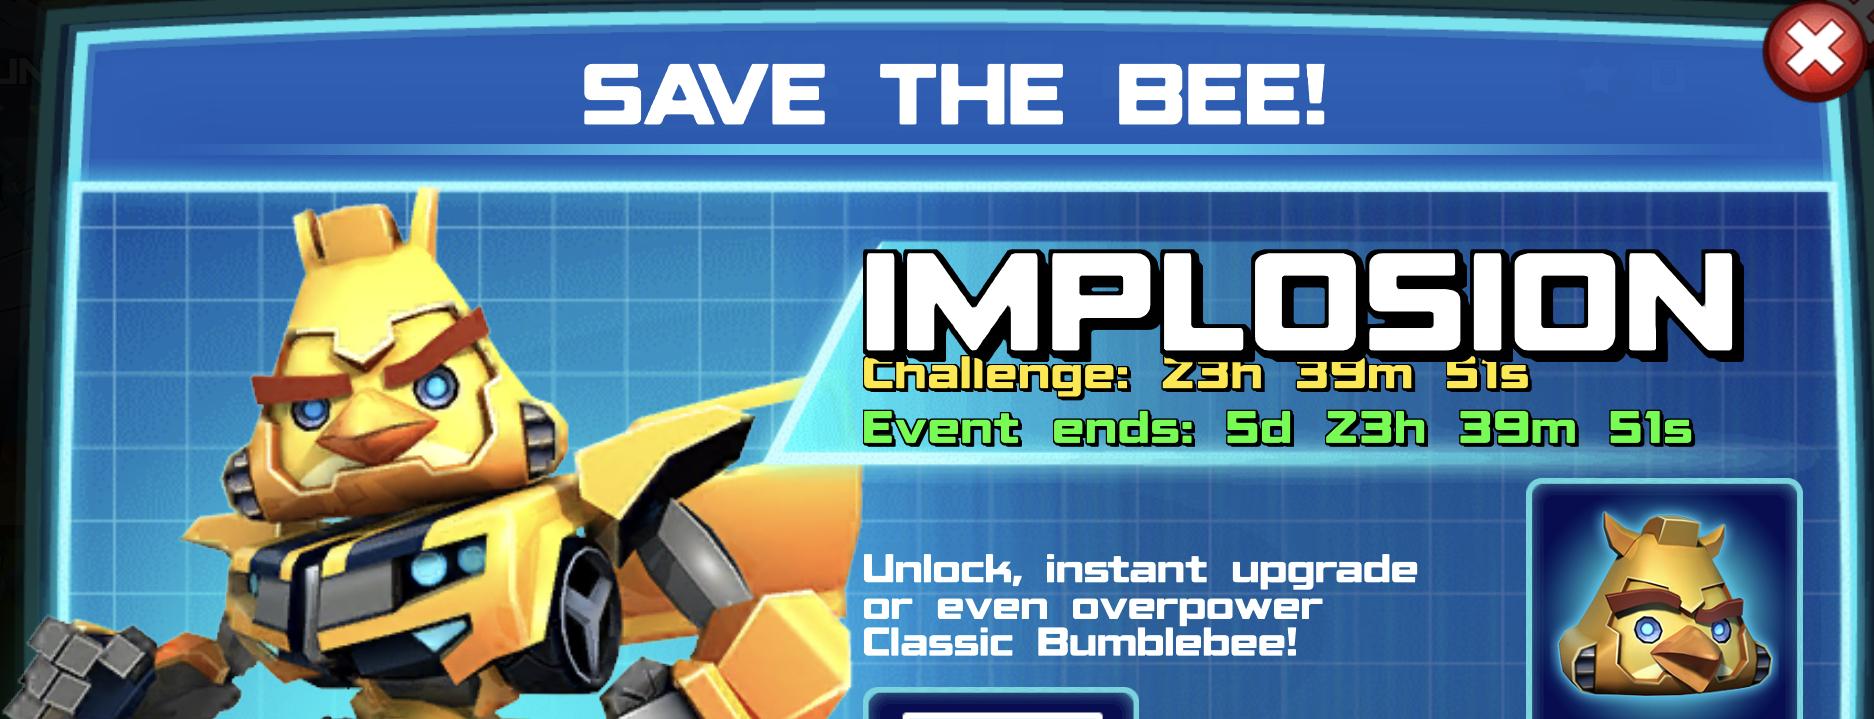 The event banner for Save The Bee!